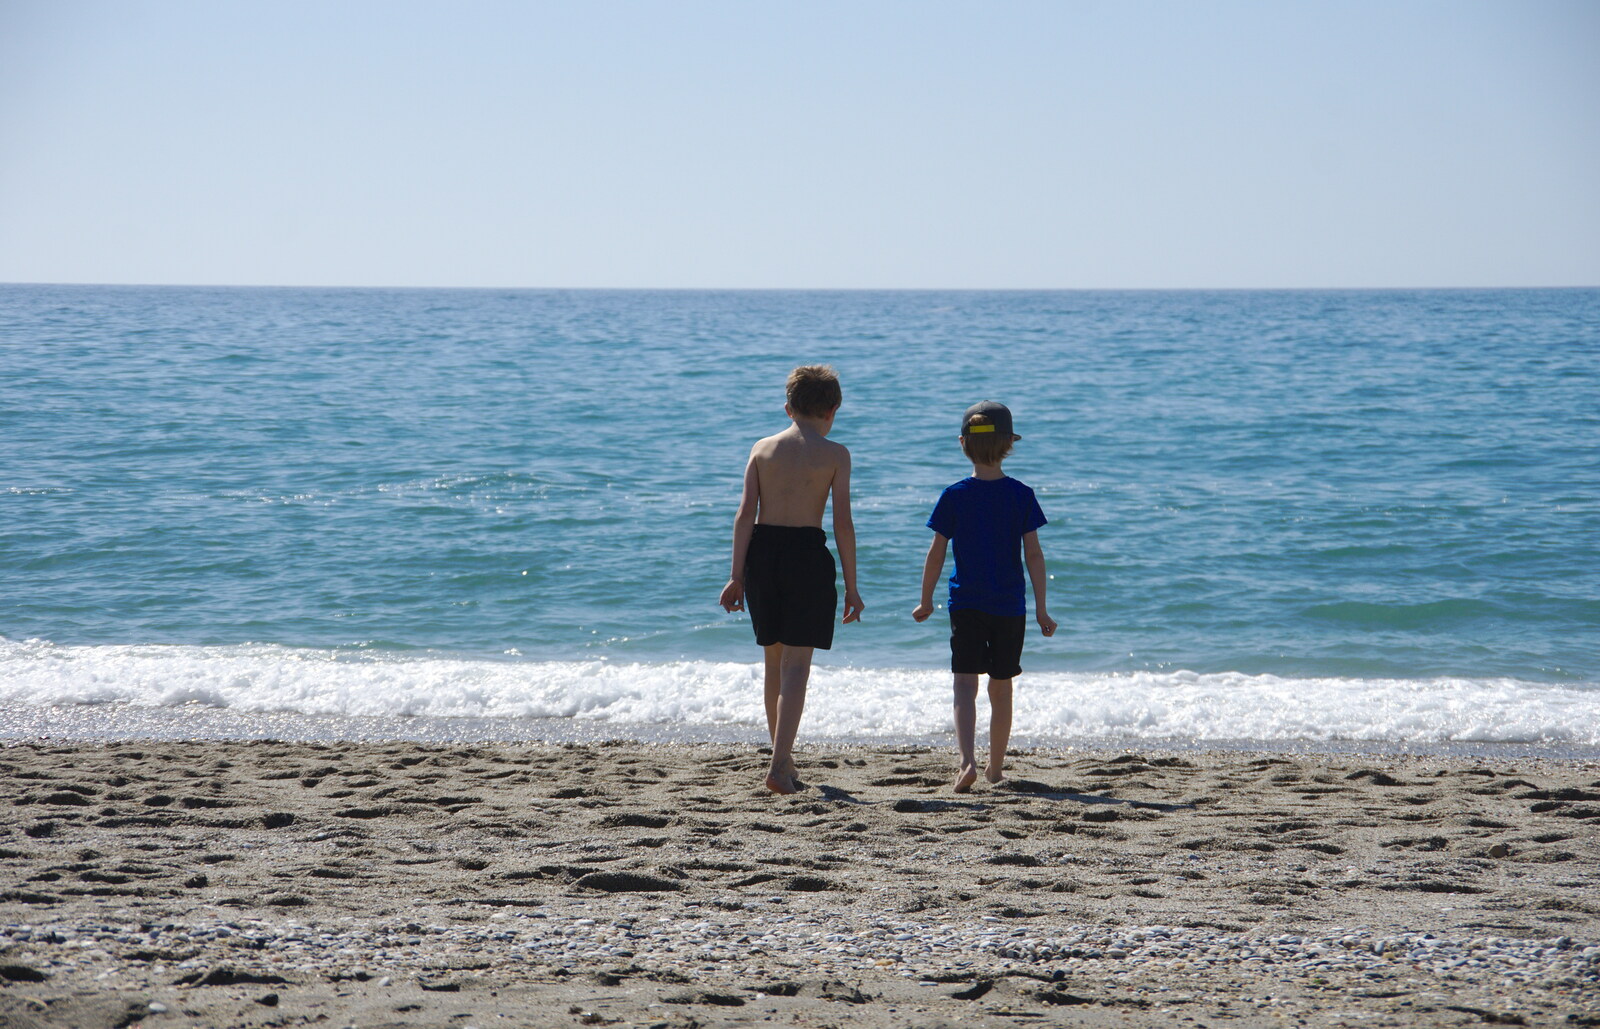 The boys tentatively try out the sea from A Holiday in Nerja, Andalusia, Spain - 15th April 2019